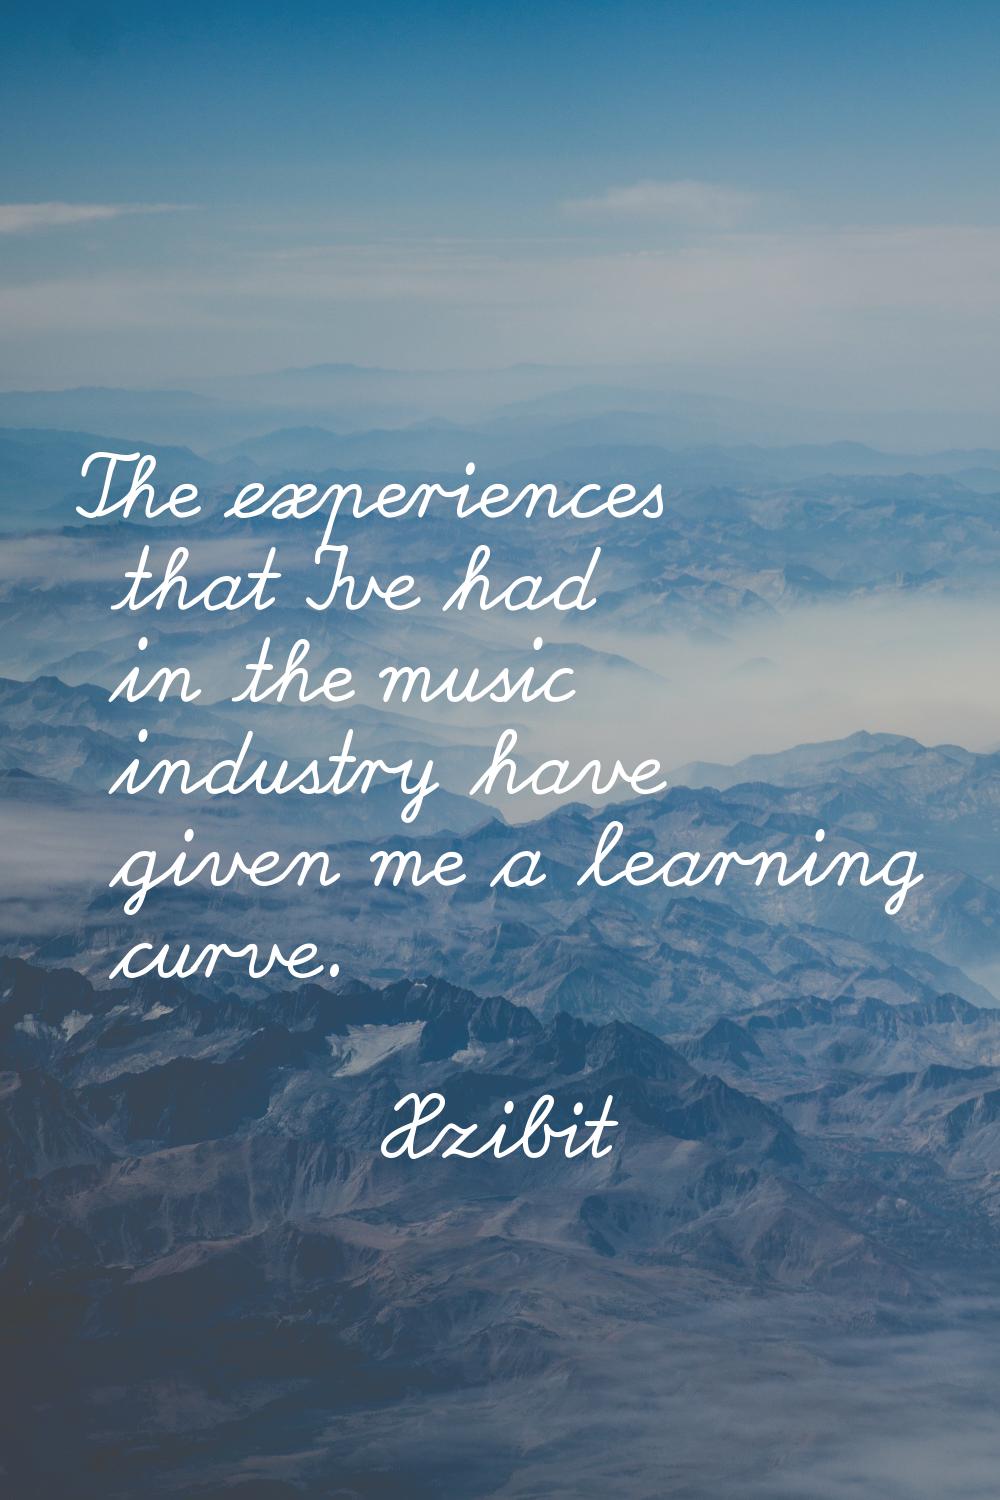 The experiences that I've had in the music industry have given me a learning curve.